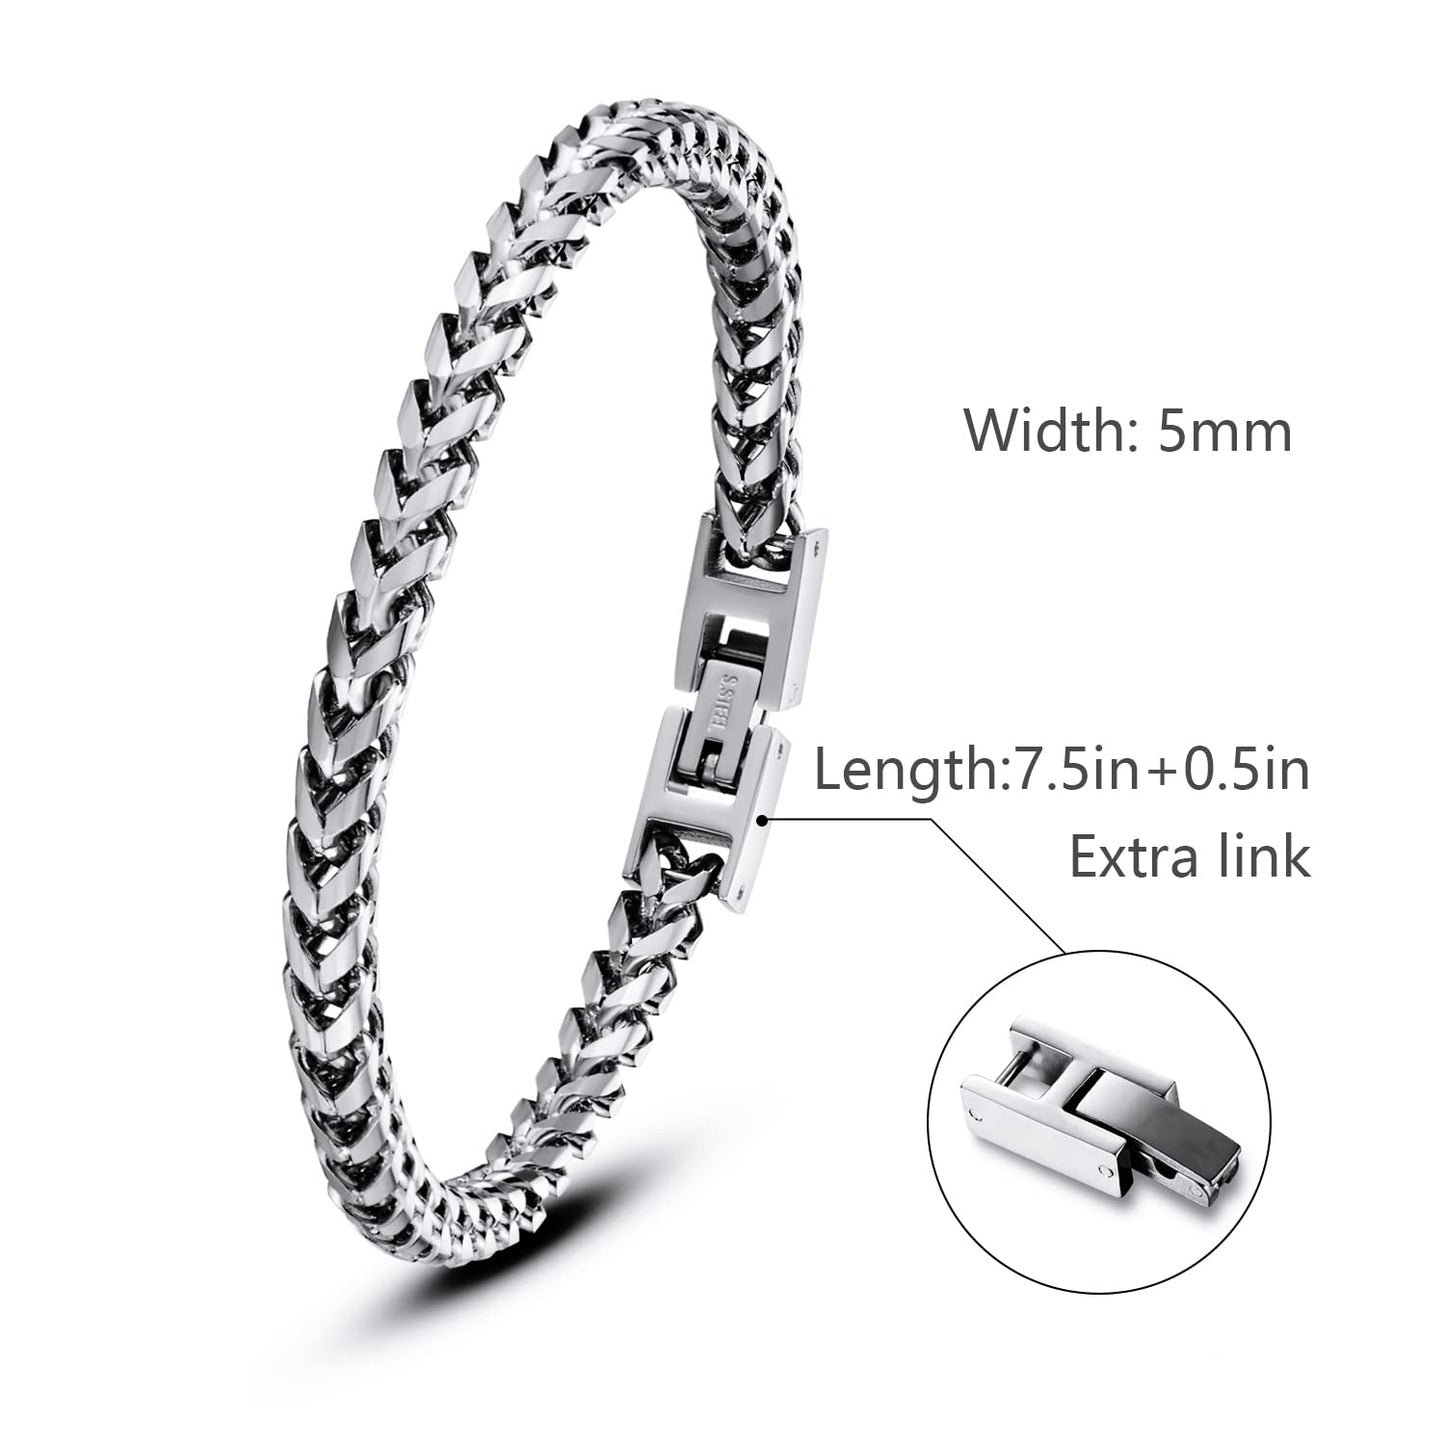 Mens Bracelet - Stainless Steel Fold Over Clasp Franco Chain Bracelets for Men Jewelry Gifts for Dad Grandpa Boyfriend Husband Son Brother